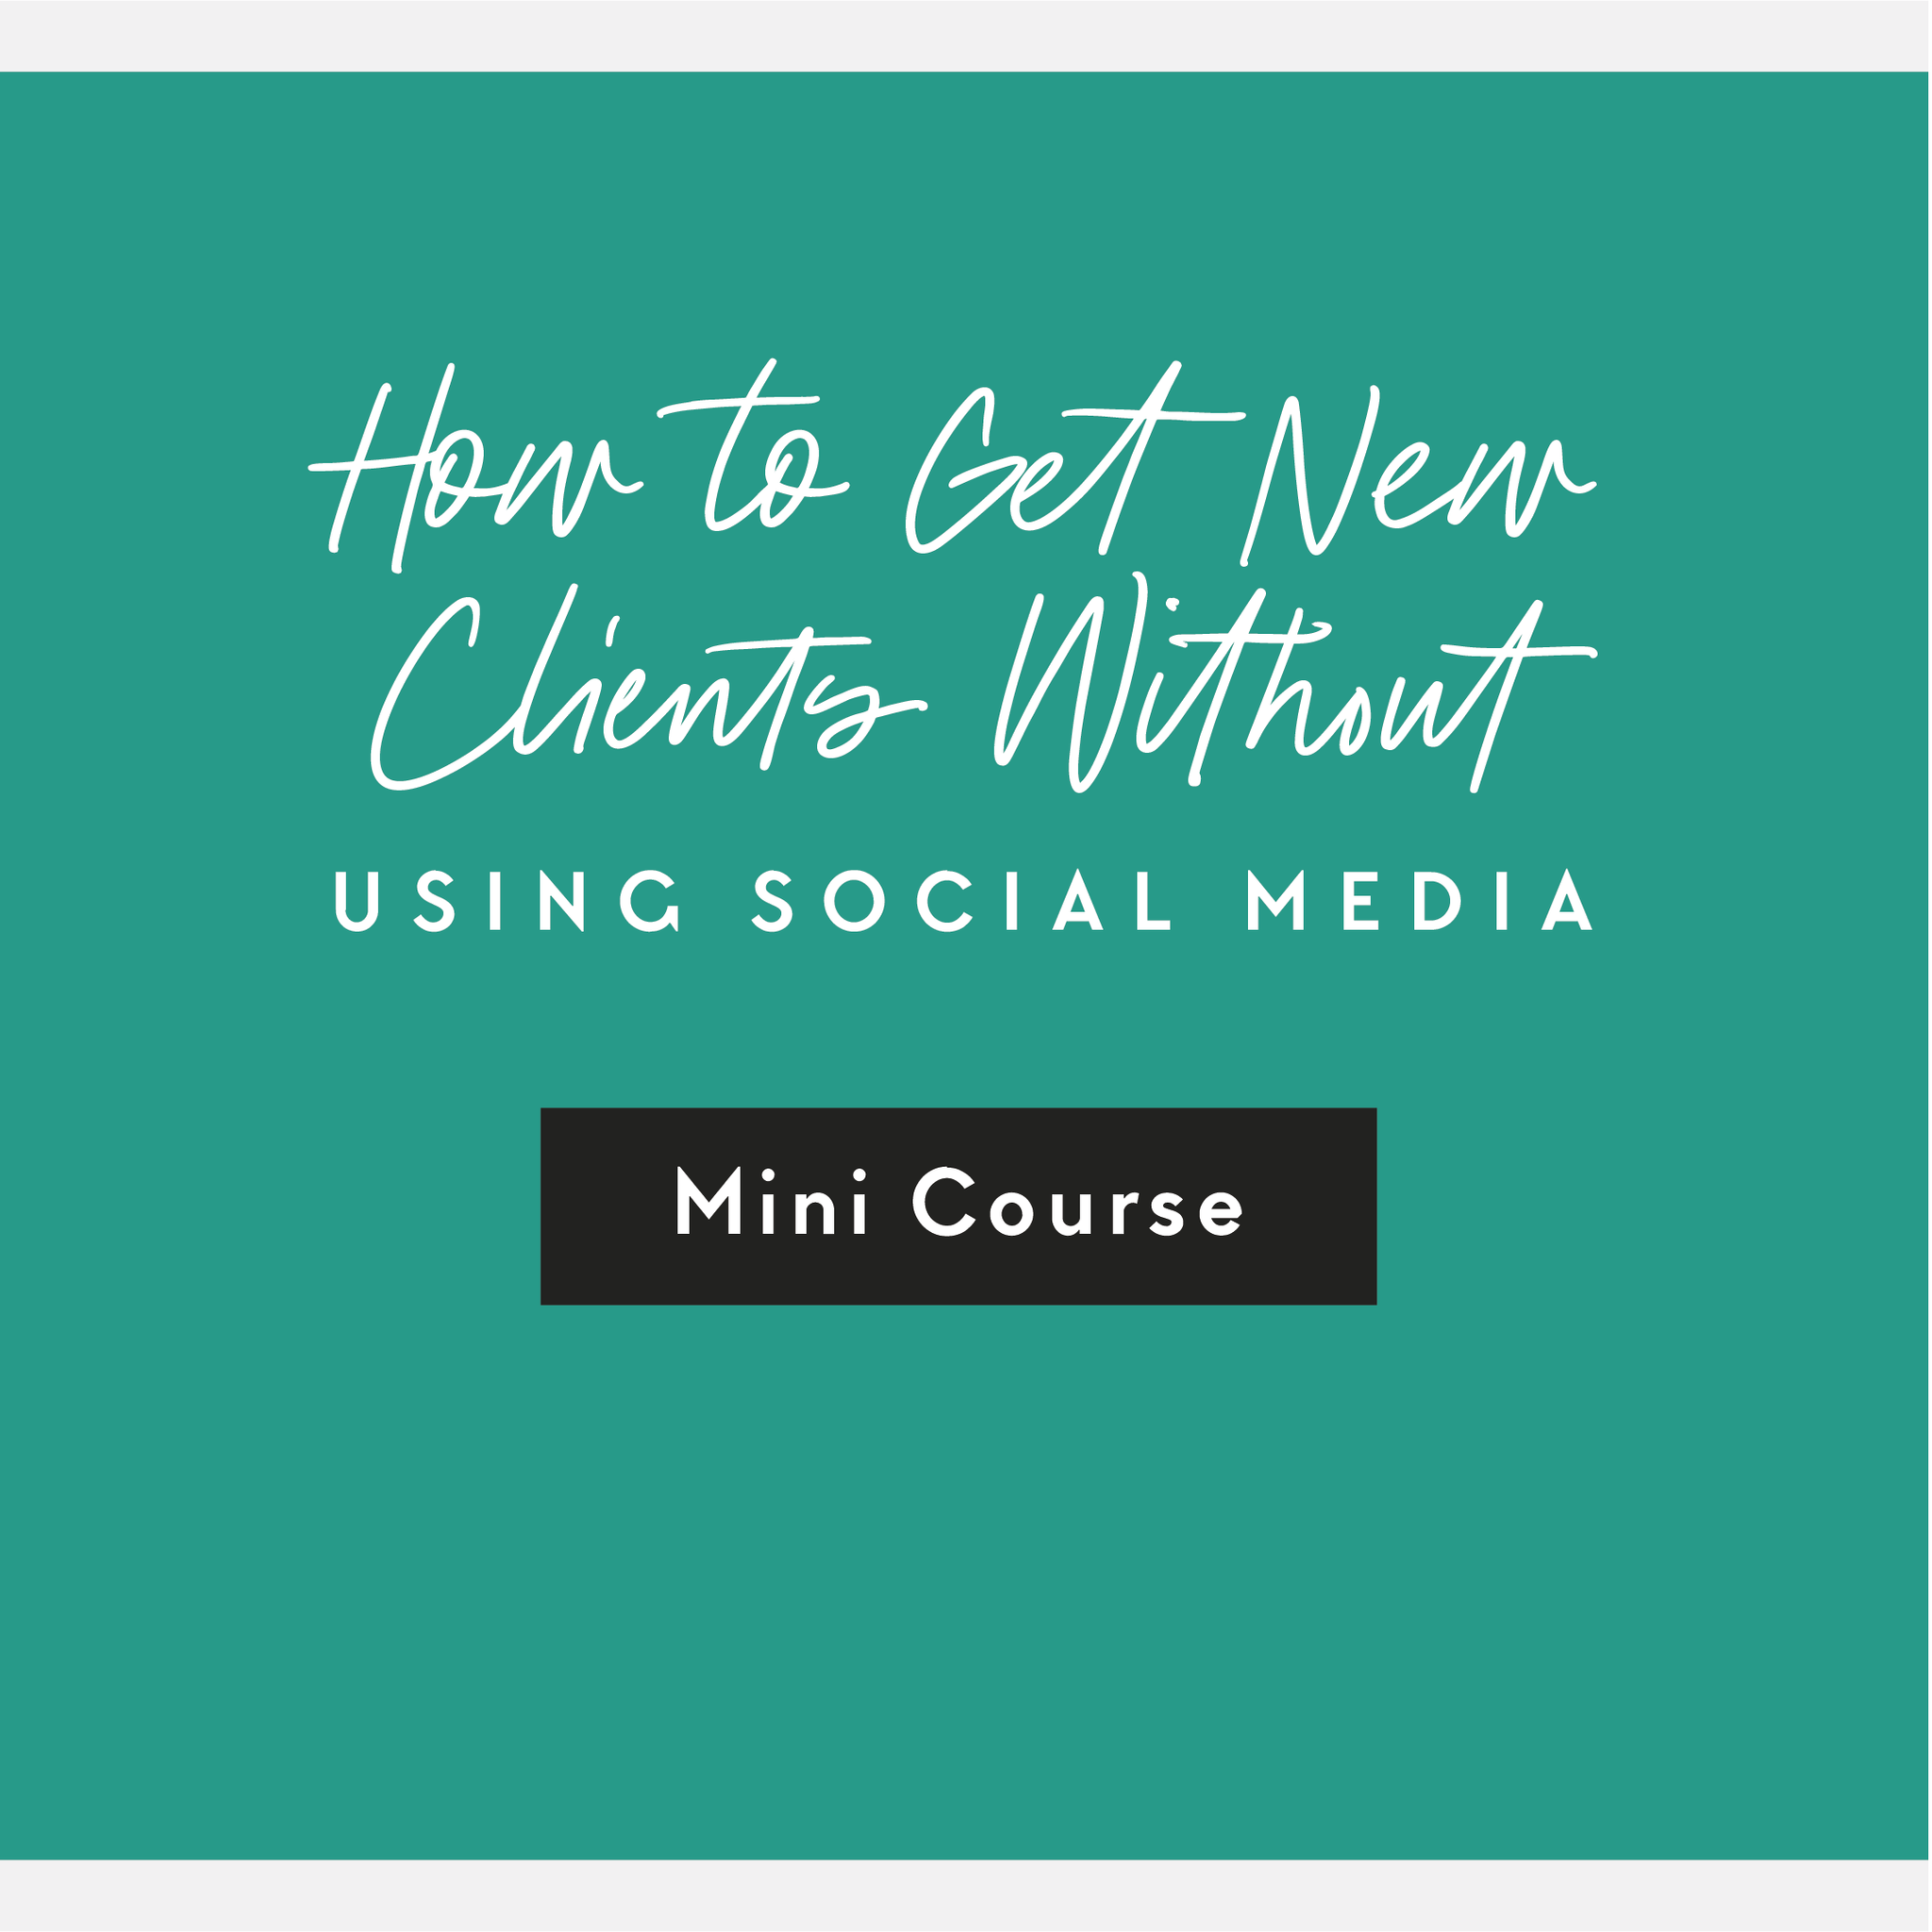 How to get new clients WITHOUT using social media